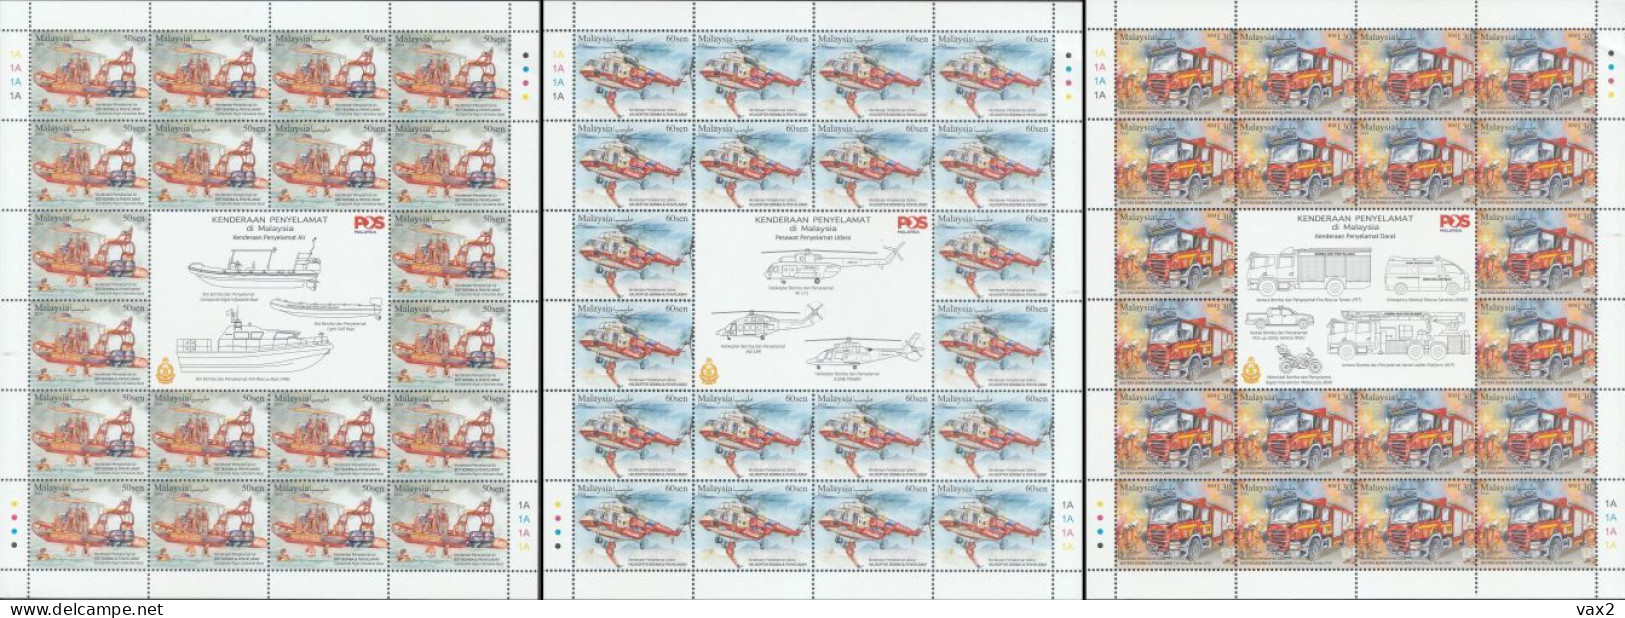 Malaysia 2024-4 Rescue Vehicle Full Sheet MNH Firefighting Transport Boat Helicopter Fire Engine Truck - Malaysia (1964-...)